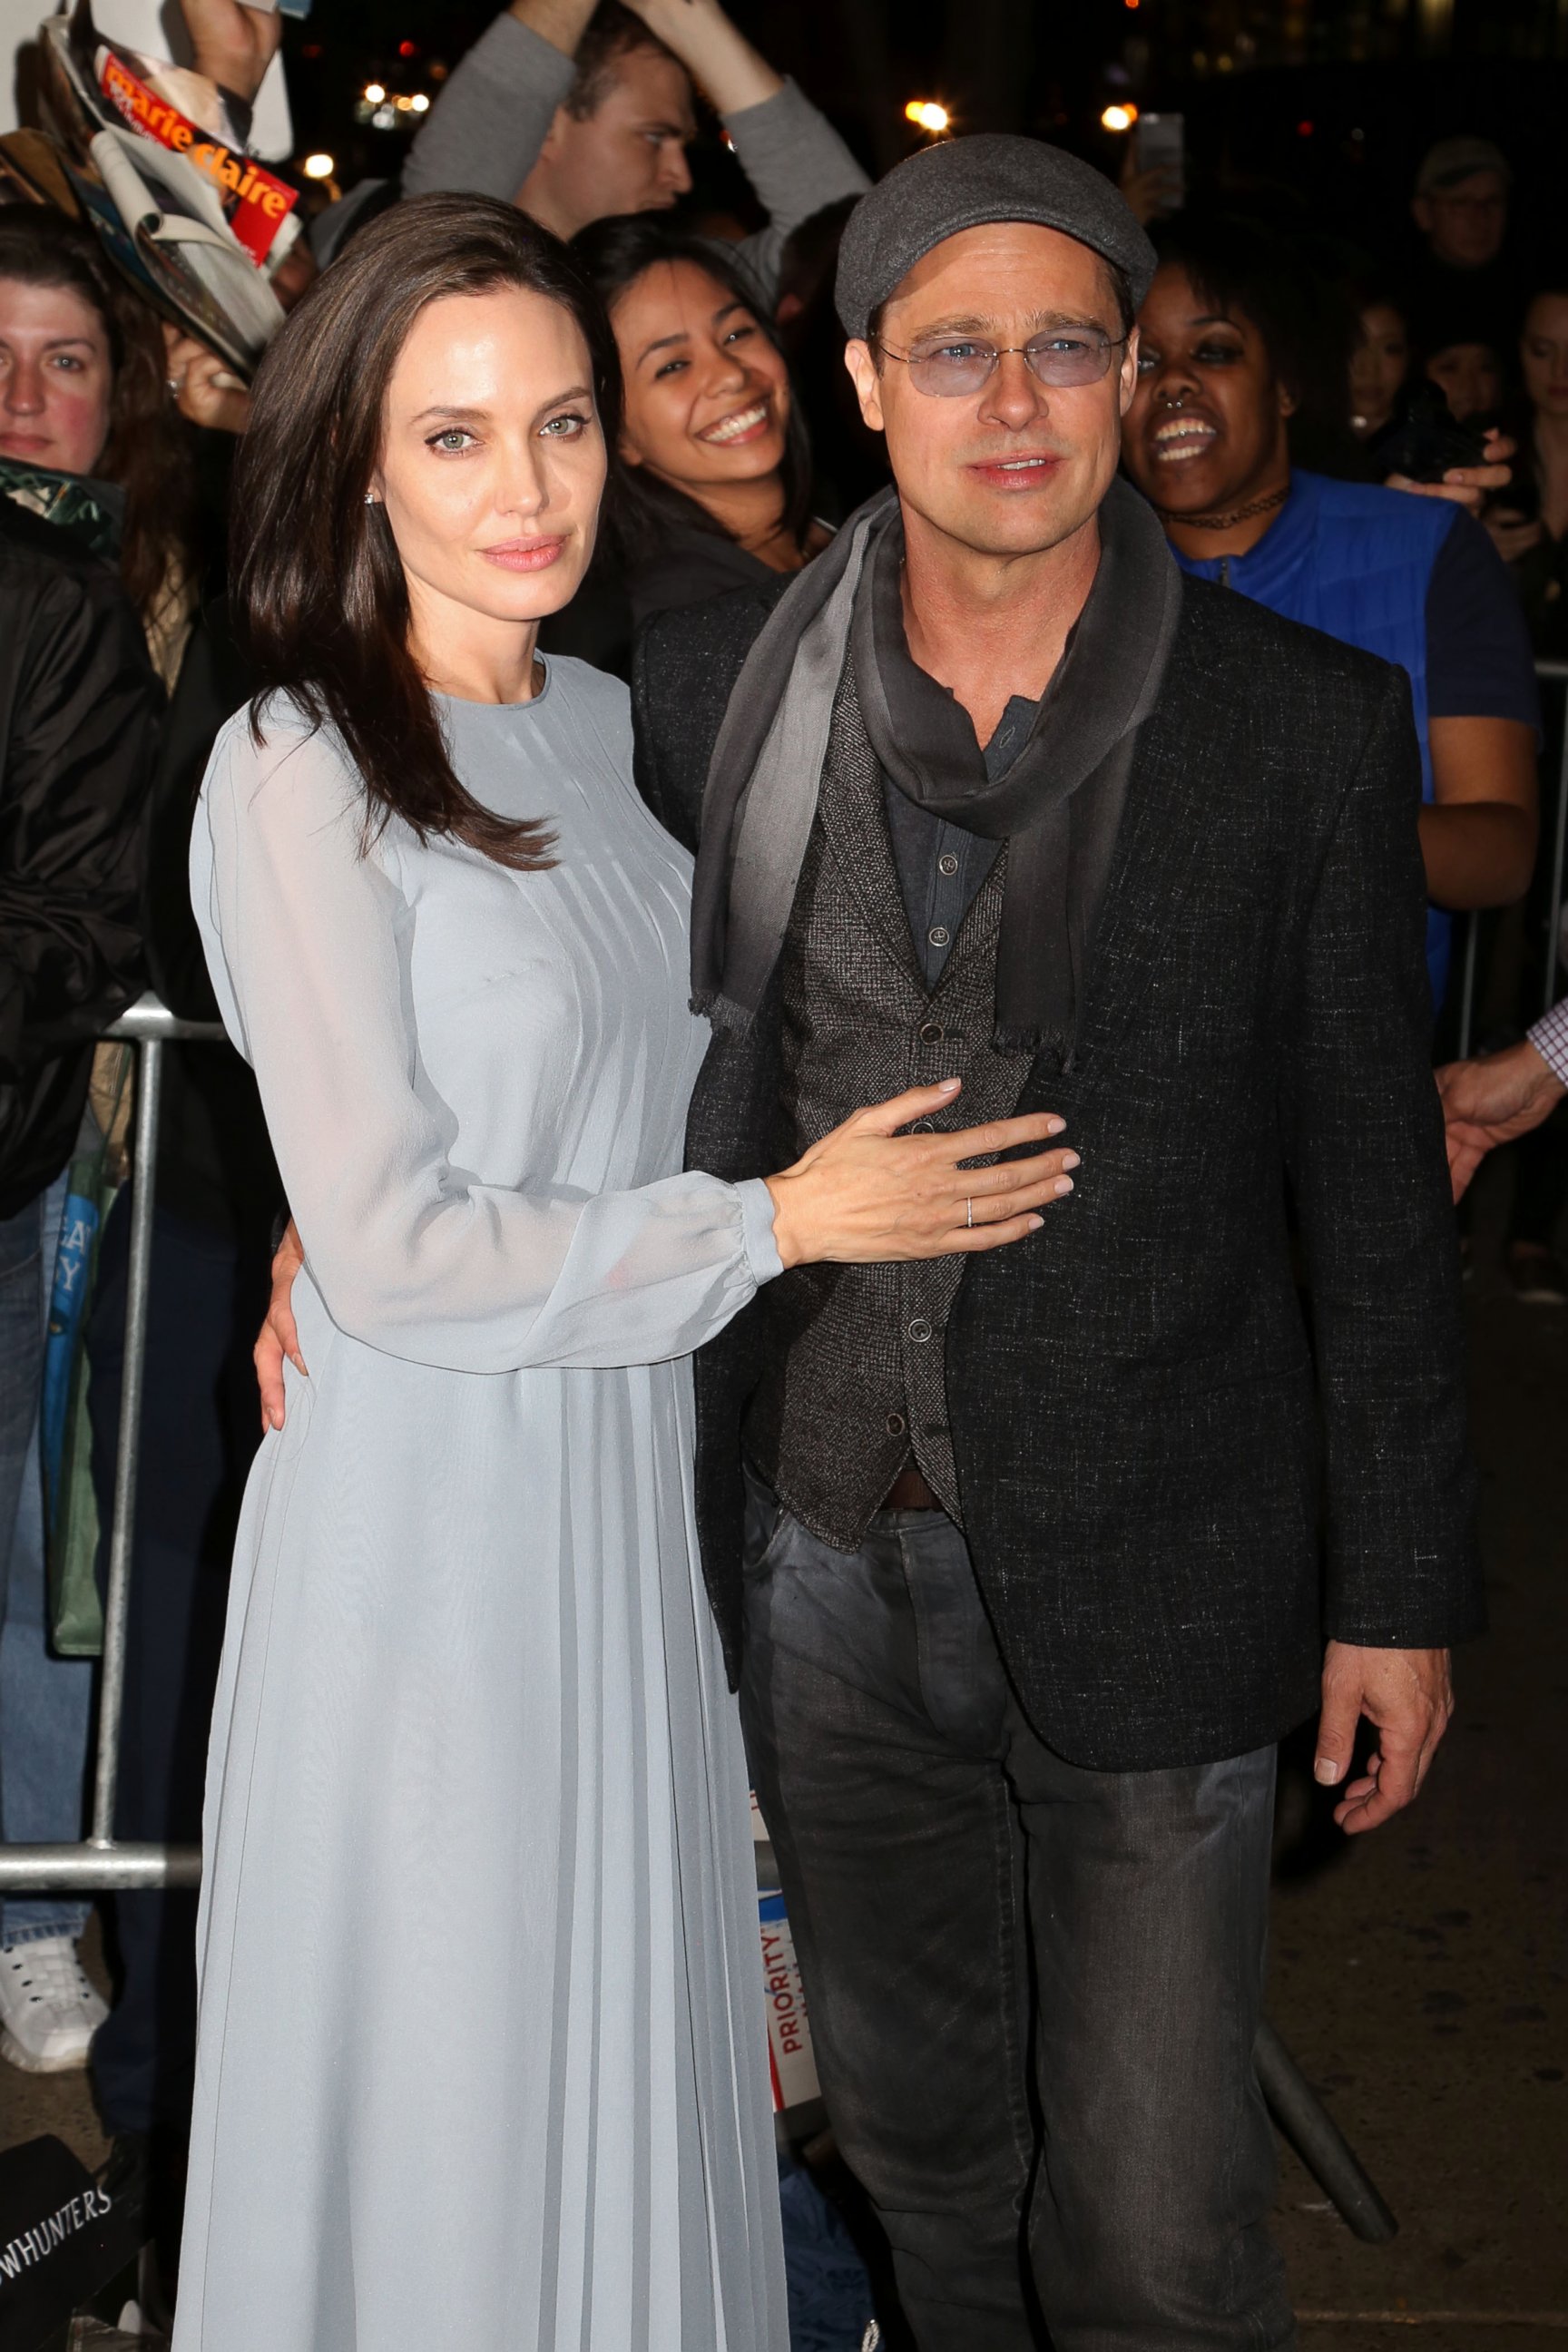 PHOTO: Angelina Jolie and Brad Pitt attend a special screening of "By The Sea" on Nov. 3, 2015, in New York.